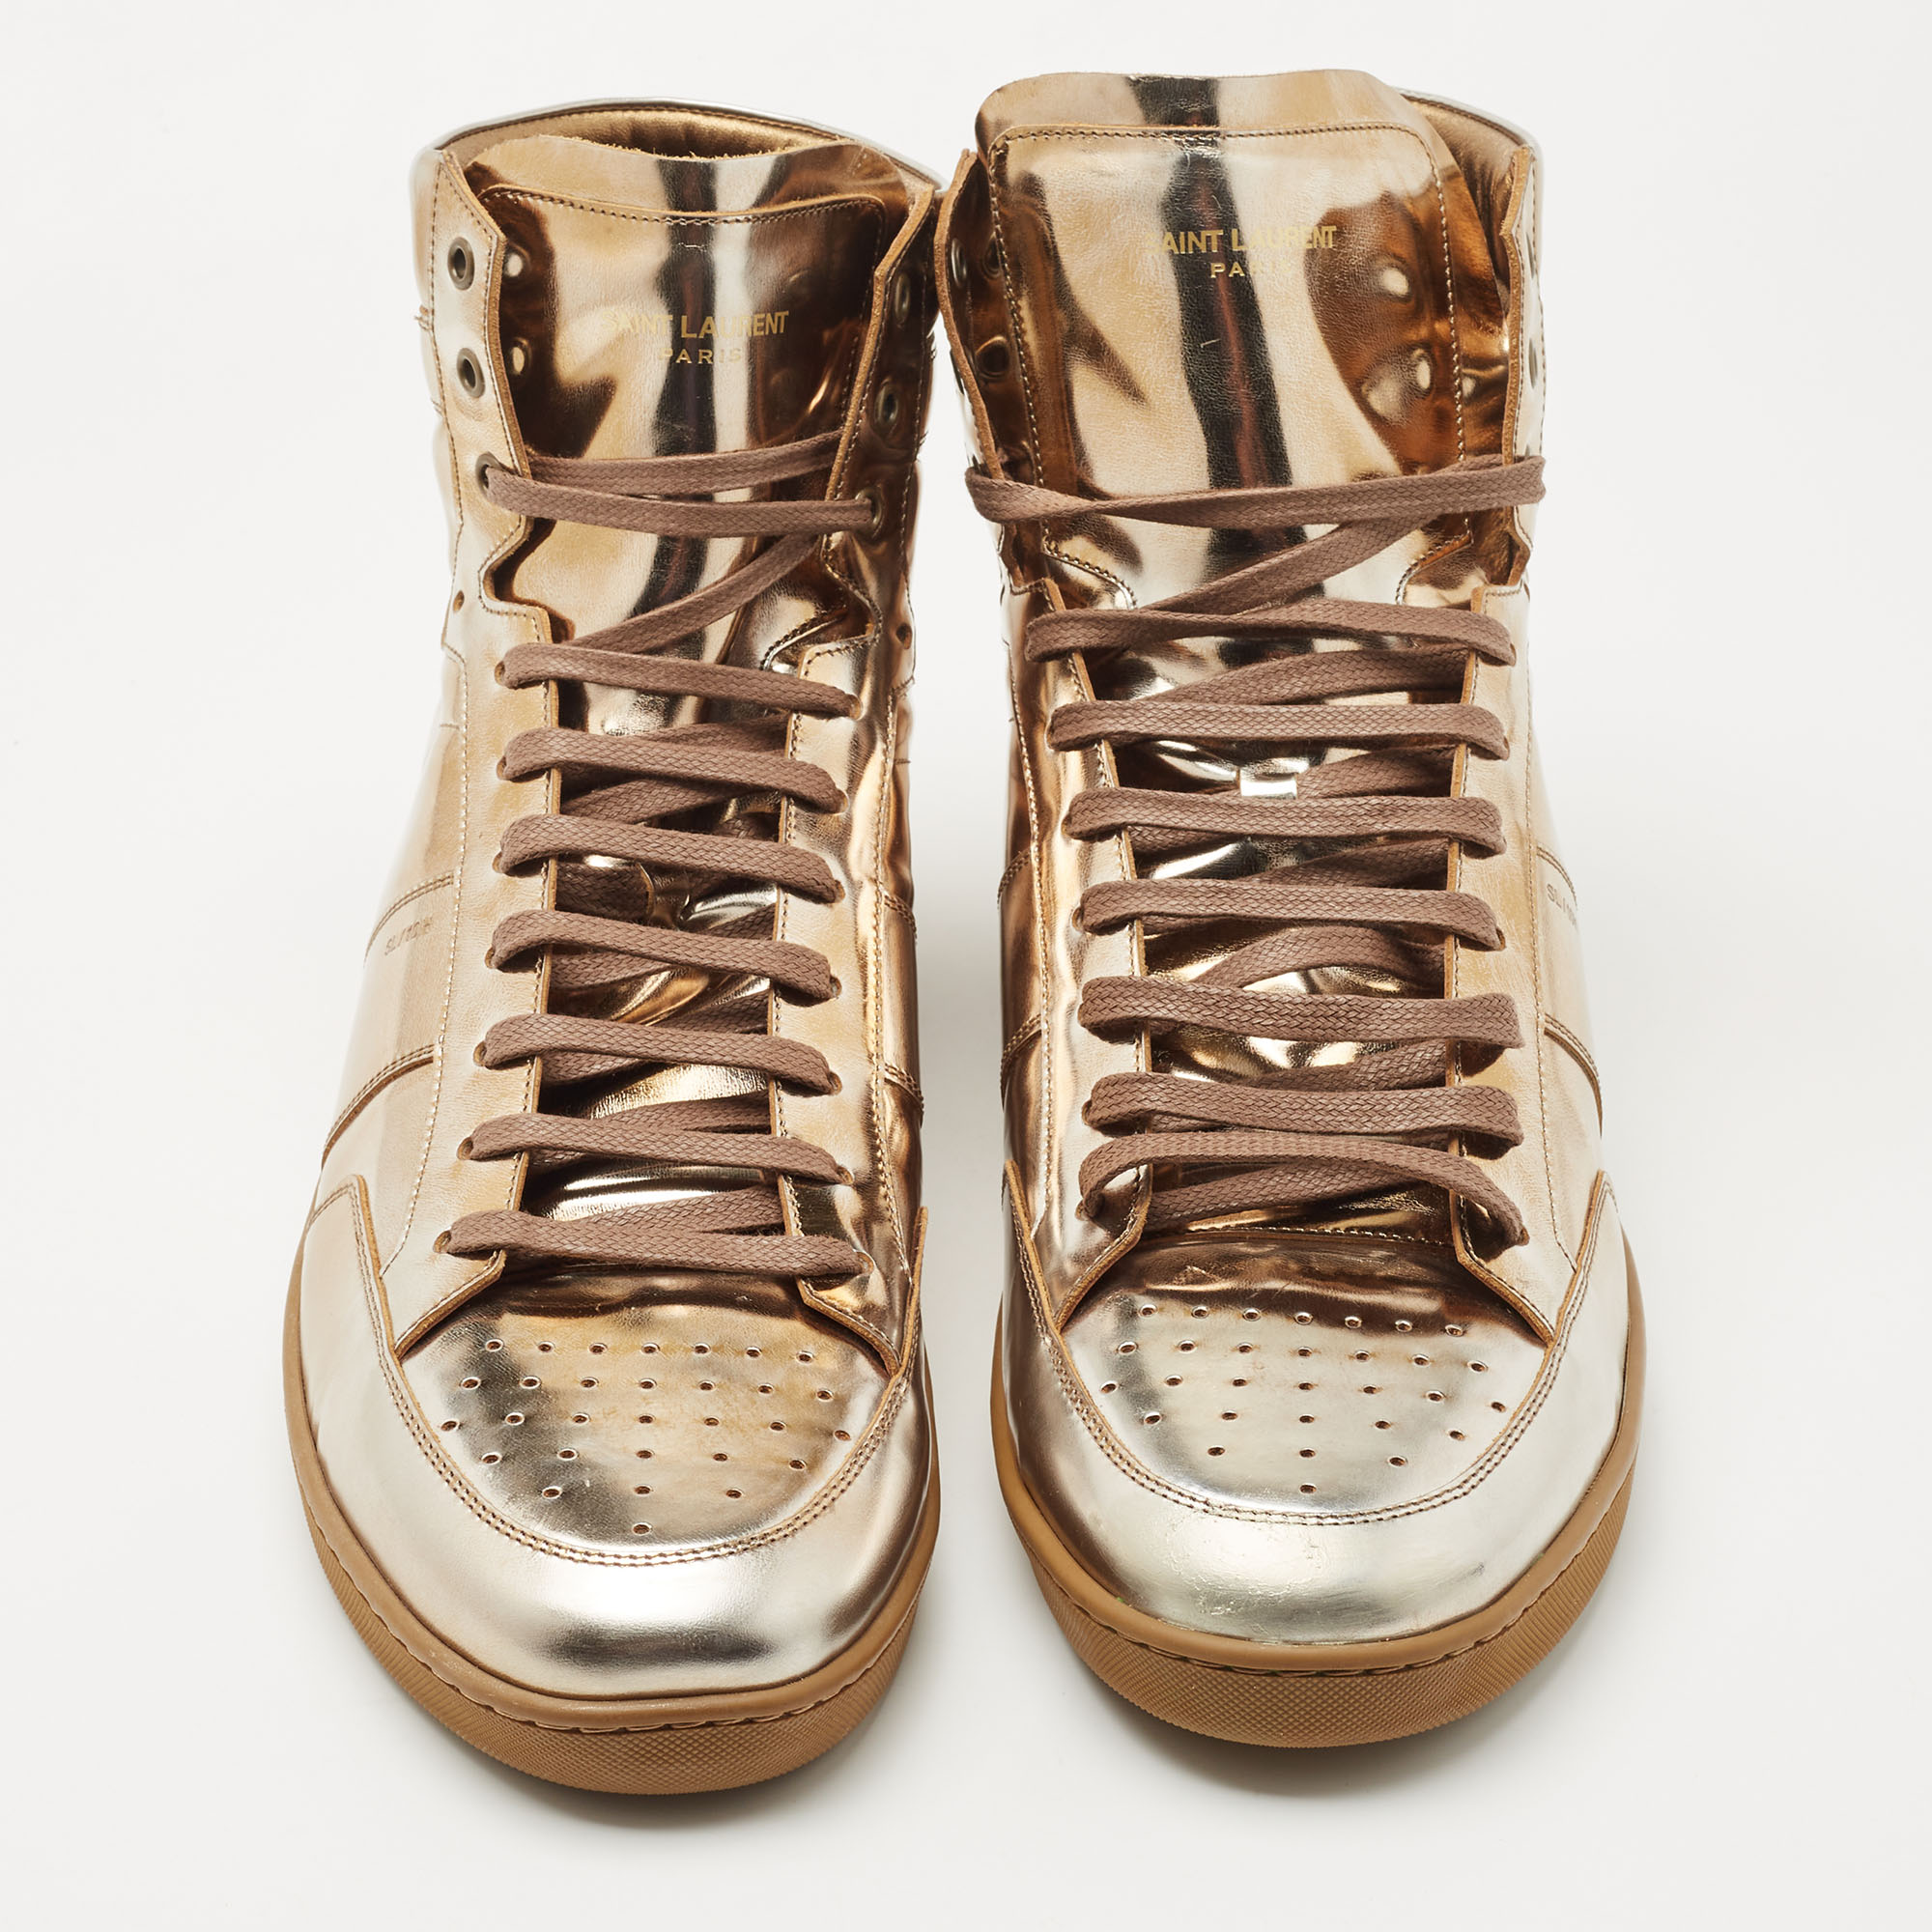 Saint Laurent Gold Leather High Top Sneaker Size 50